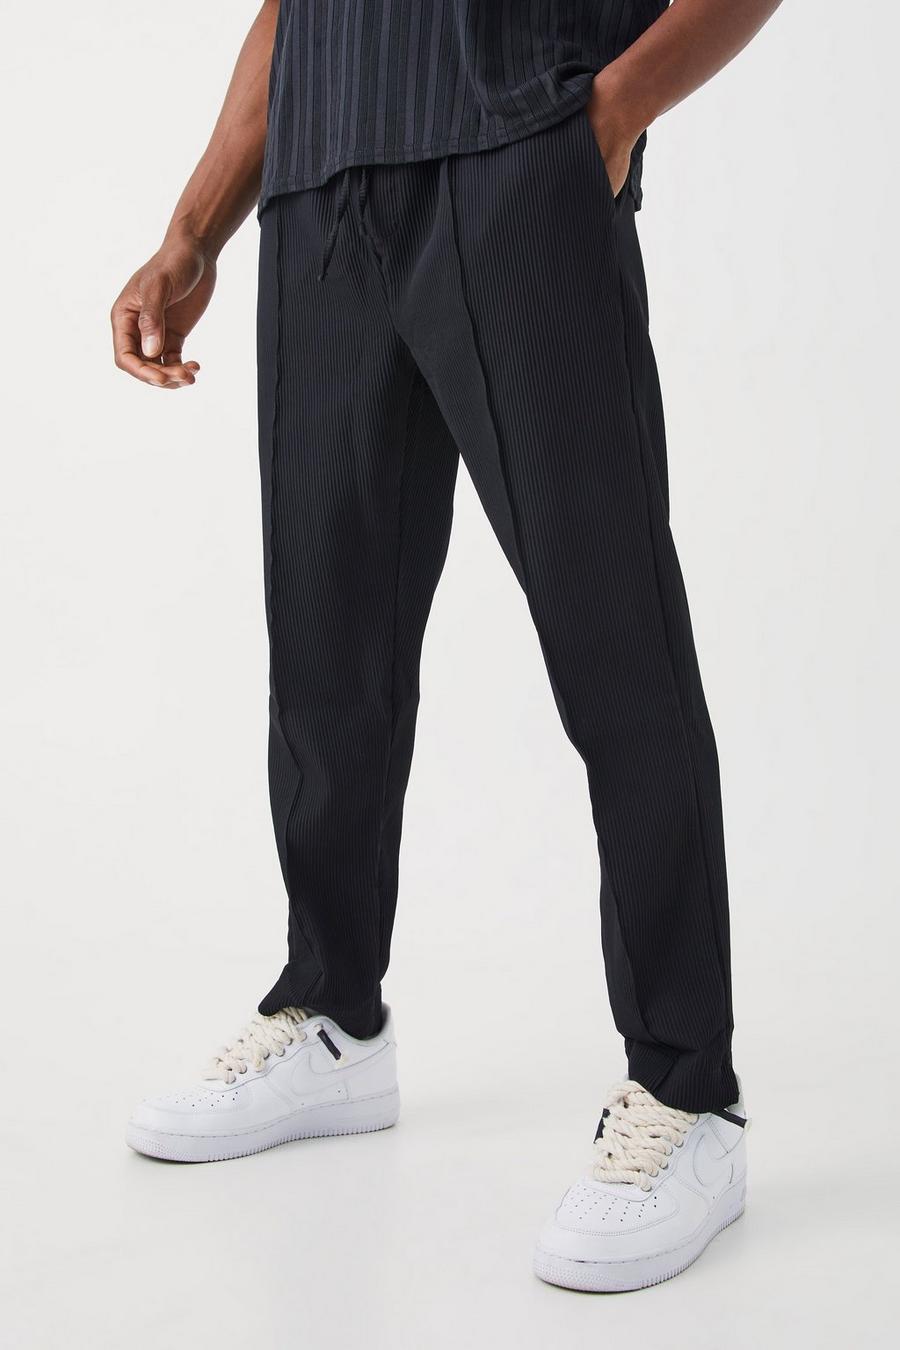 Men's Pleated Trousers, Mens High Waisted Pleated Trousers